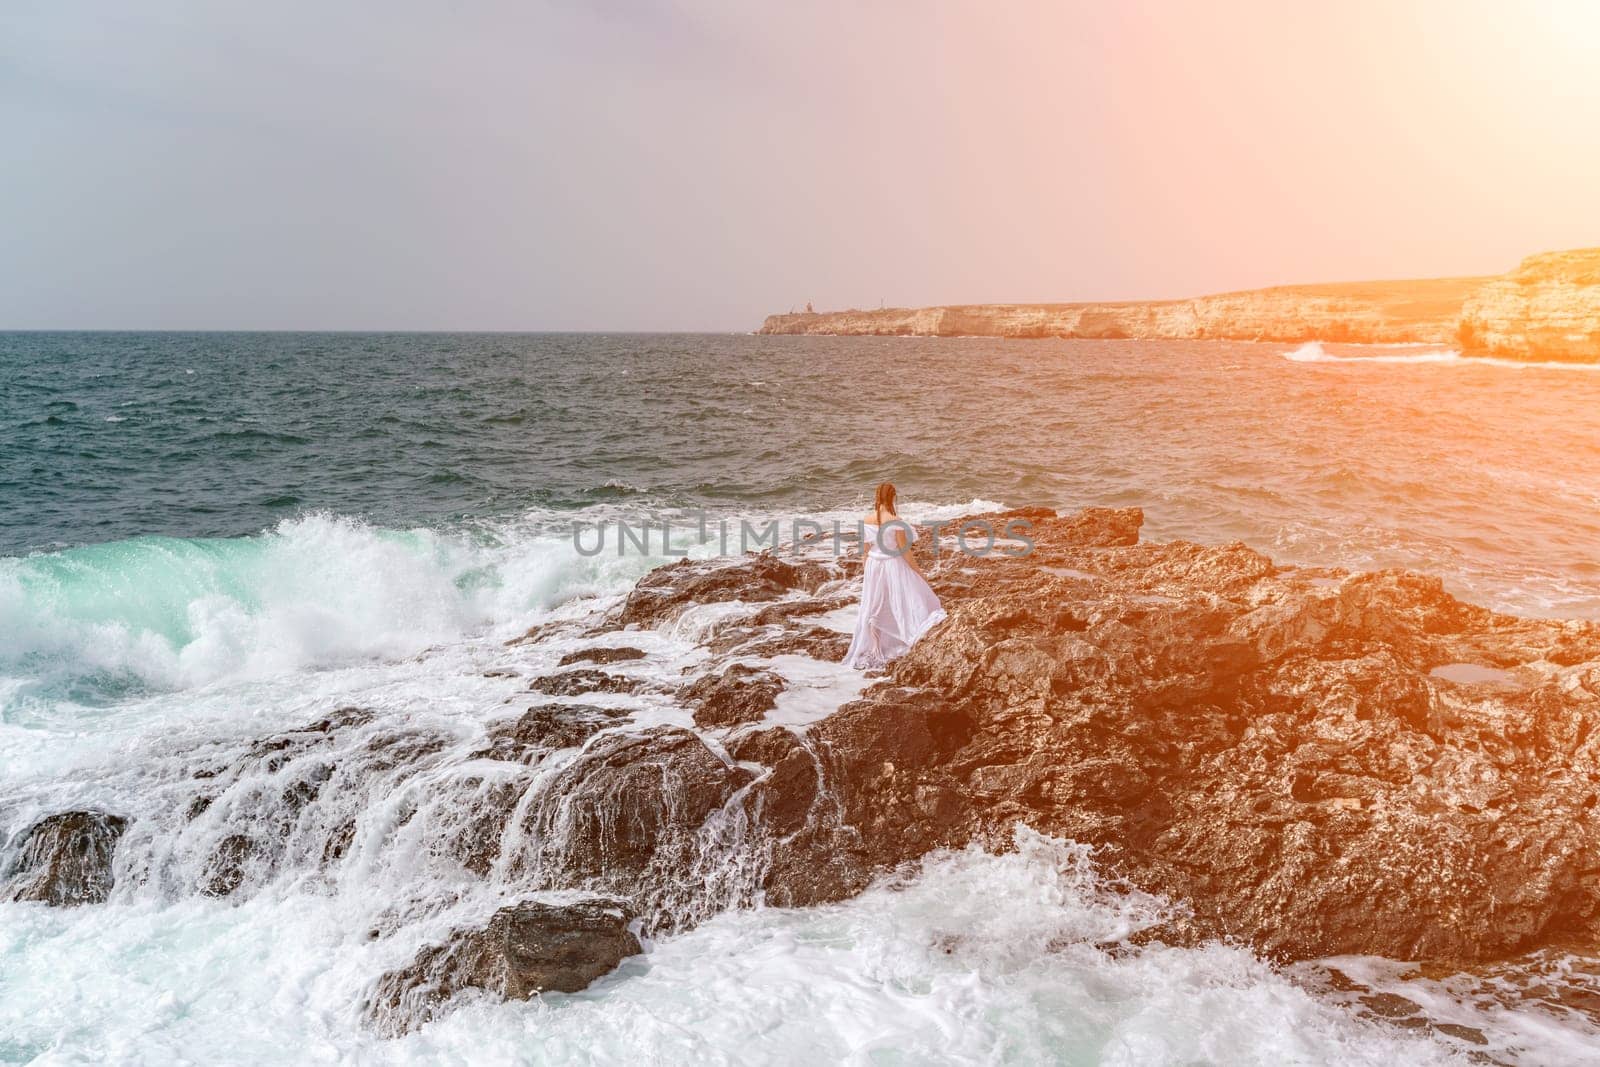 A woman stands on a rock in the sea during a storm. Dressed in a white long dress, the waves break on the rocks and white spray rises